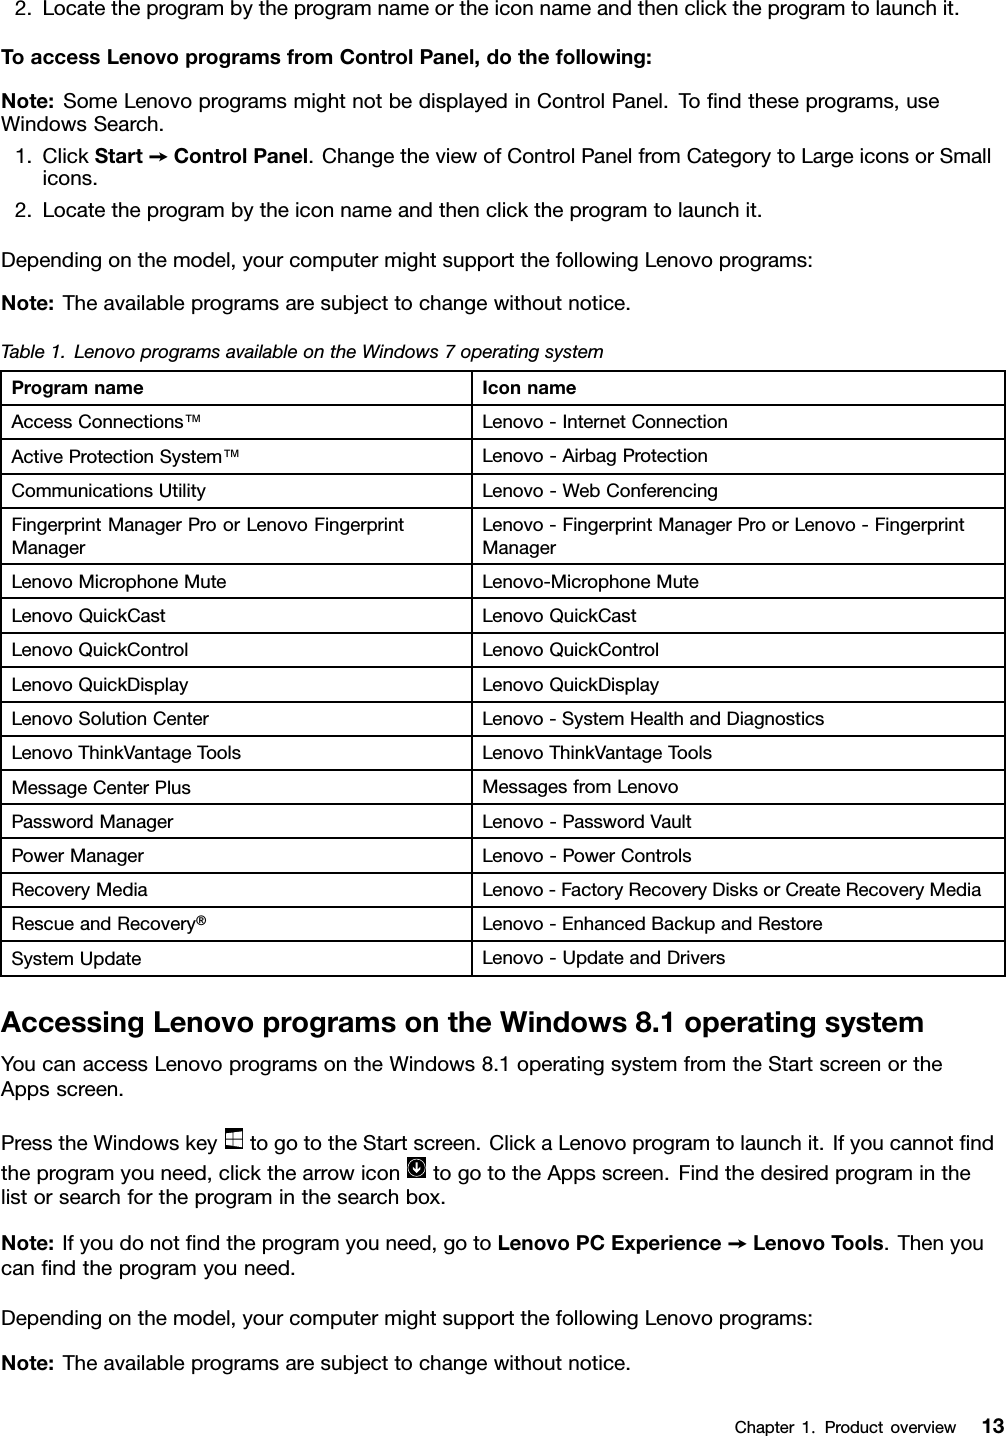 2. Locate the program by the program name or the icon name and then click the program to launch it.To access Lenovo programs from Control Panel, do the following:Note: Some Lenovo programs might not be displayed in Control Panel. To ﬁnd these programs, useWindows Search.1. Click Start ➙Control Panel. Change the view of Control Panel from Category to Large icons or Smallicons.2. Locate the program by the icon name and then click the program to launch it.Depending on the model, your computer might support the following Lenovo programs:Note: The available programs are subject to change without notice.Table 1. Lenovo programs available on the Windows 7 operating systemProgram name Icon nameAccess Connections™Lenovo - Internet ConnectionActive Protection System™Lenovo - Airbag ProtectionCommunications Utility Lenovo - Web ConferencingFingerprint Manager Pro or Lenovo FingerprintManagerLenovo - Fingerprint Manager Pro or Lenovo - FingerprintManagerLenovo Microphone Mute Lenovo-Microphone MuteLenovo QuickCast Lenovo QuickCastLenovo QuickControl Lenovo QuickControlLenovo QuickDisplay Lenovo QuickDisplayLenovo Solution Center Lenovo - System Health and DiagnosticsLenovo ThinkVantage Tools Lenovo ThinkVantage ToolsMessage Center Plus Messages from LenovoPassword Manager Lenovo - Password VaultPower Manager Lenovo - Power ControlsRecovery Media Lenovo - Factory Recovery Disks or Create Recovery MediaRescue and Recovery®Lenovo - Enhanced Backup and RestoreSystem Update Lenovo - Update and DriversAccessing Lenovo programs on the Windows 8.1 operating systemYou can access Lenovo programs on the Windows 8.1 operating system from the Start screen or theApps screen.Press the Windows key to go to the Start screen. Click a Lenovo program to launch it. If you cannot ﬁndthe program you need, click the arrow icon to go to the Apps screen. Find the desired program in thelist or search for the program in the search box.Note: If you do not ﬁnd the program you need, go to Lenovo PC Experience ➙Lenovo Tools. Then youcan ﬁnd the program you need.Depending on the model, your computer might support the following Lenovo programs:Note: The available programs are subject to change without notice.Chapter 1.Product overview 13